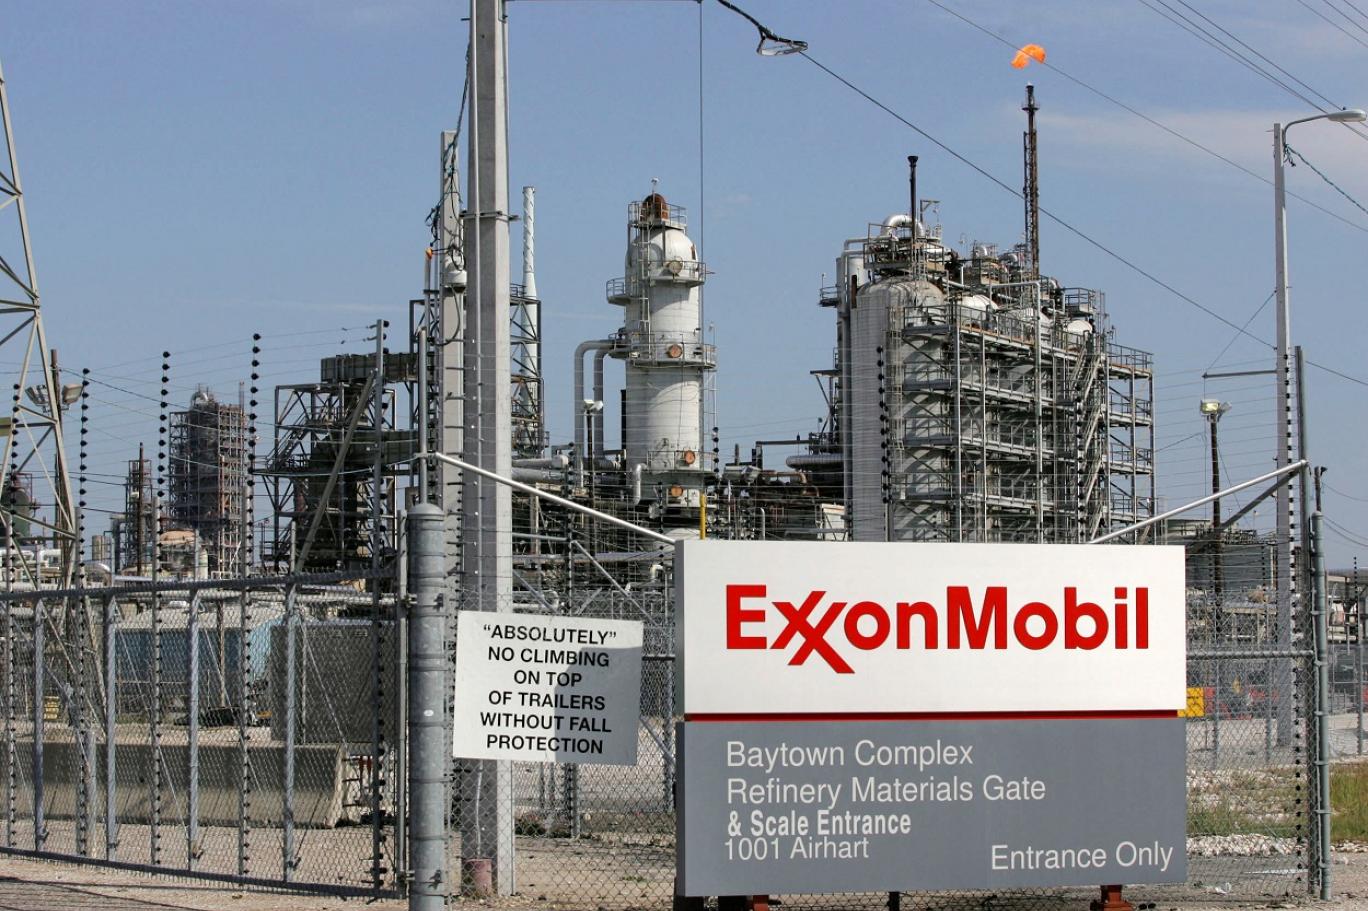 ExxonMobil still targets big oil, gas finds in favorable locations: exploration chief says after Iraq exodus